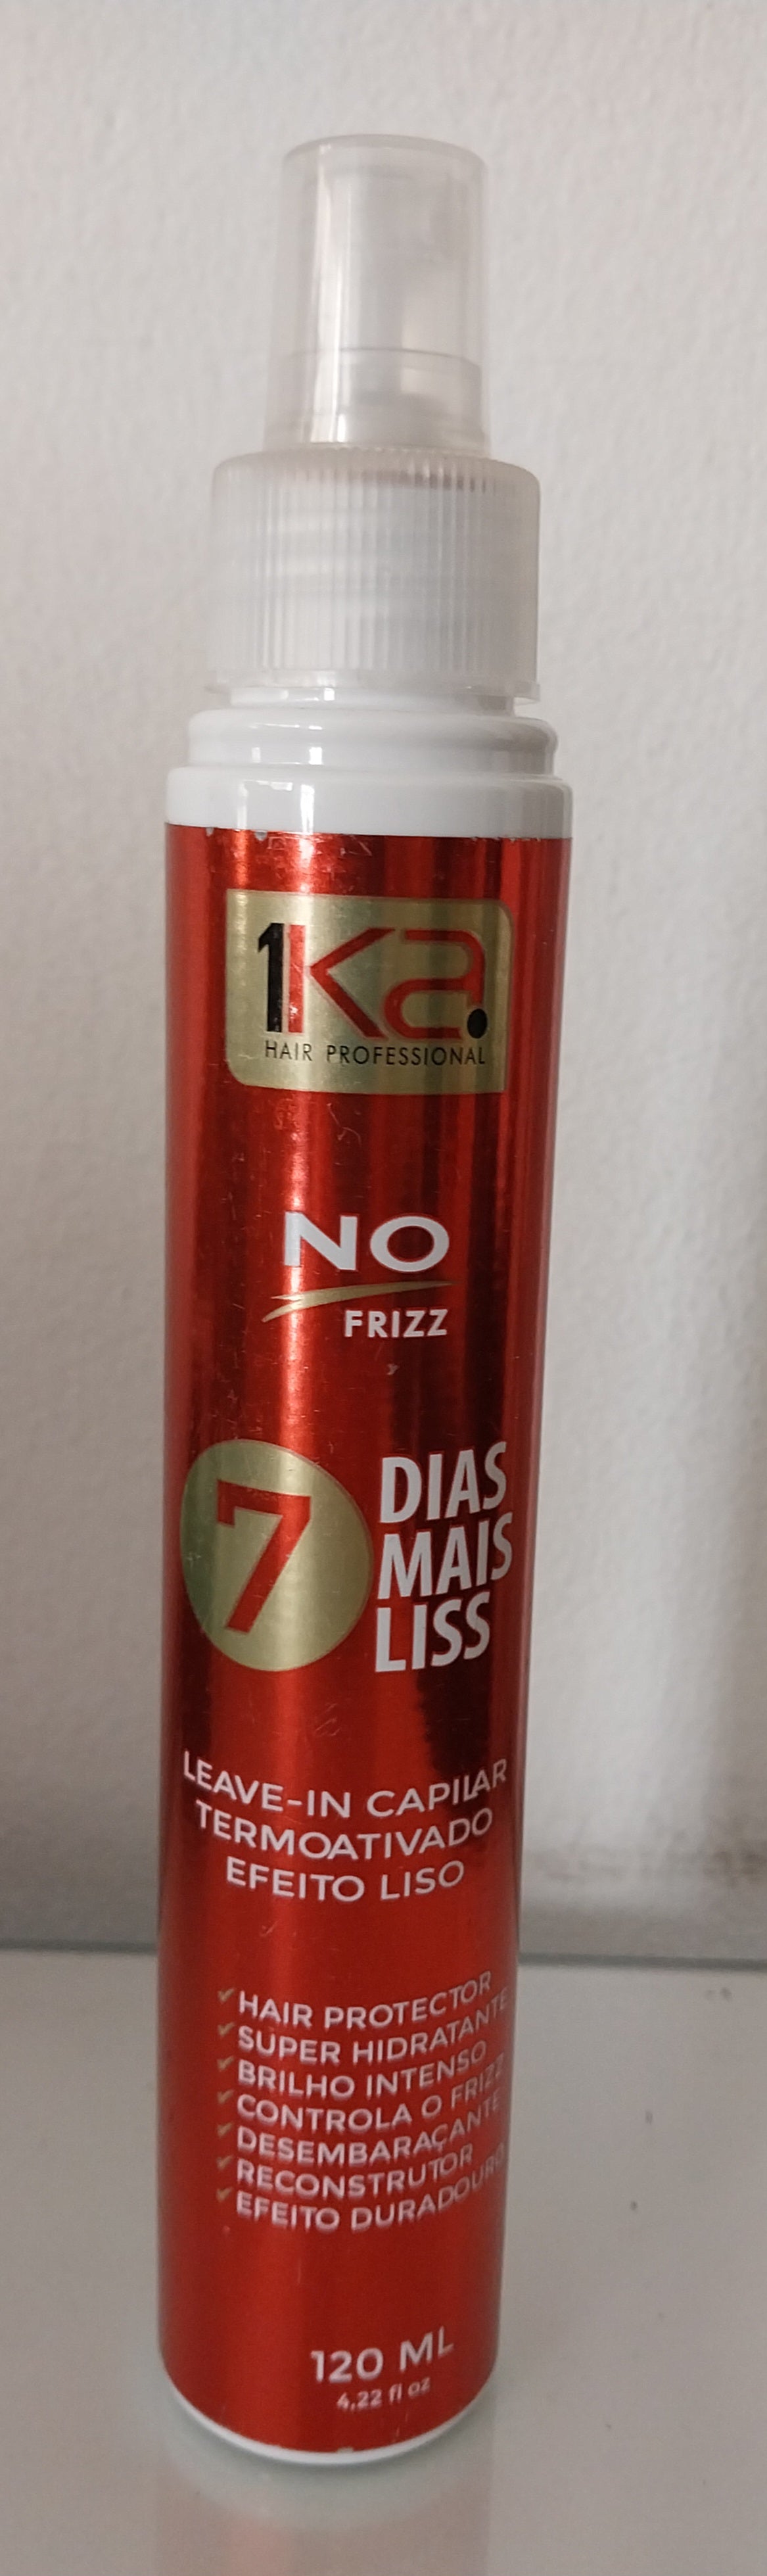 1Ka Hair Finisher Leave In Smooth Effect No Frizz Thermal Protector Finisher 7 Days 120ml - 1Ka